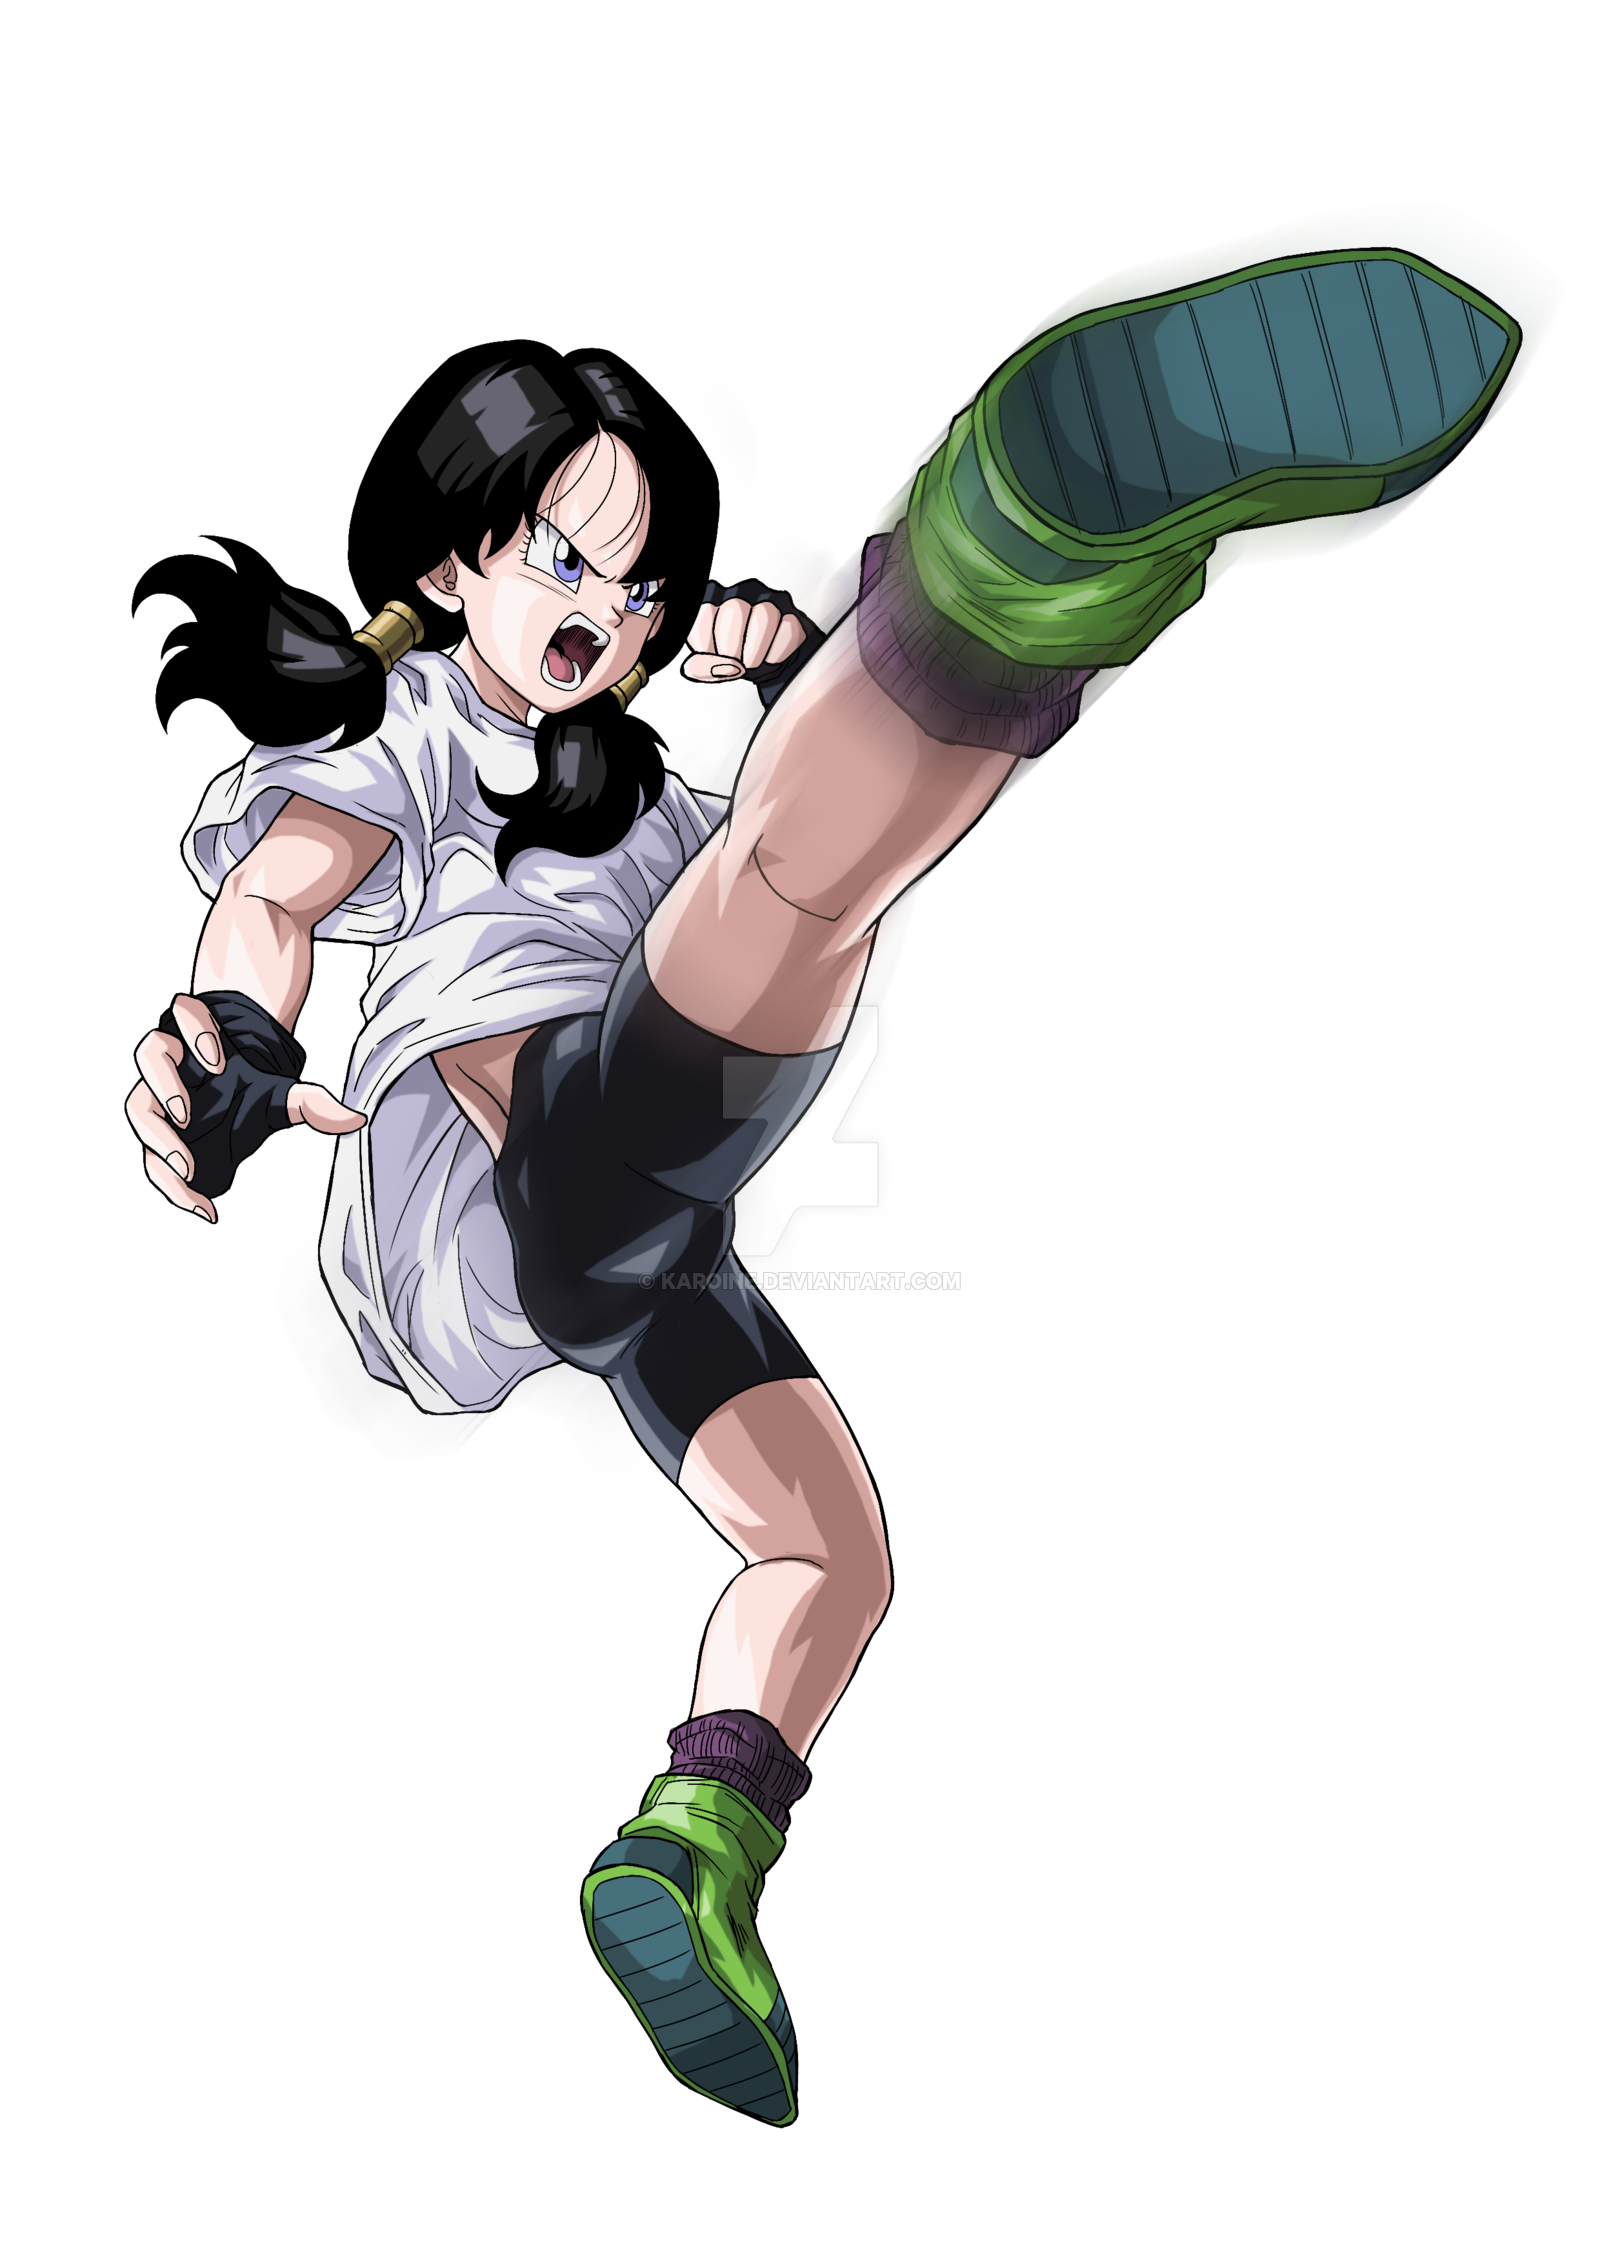 Image Videl School Outfitpng Dragon Ball Z Wikia Fandom Powered By Wikia 8983